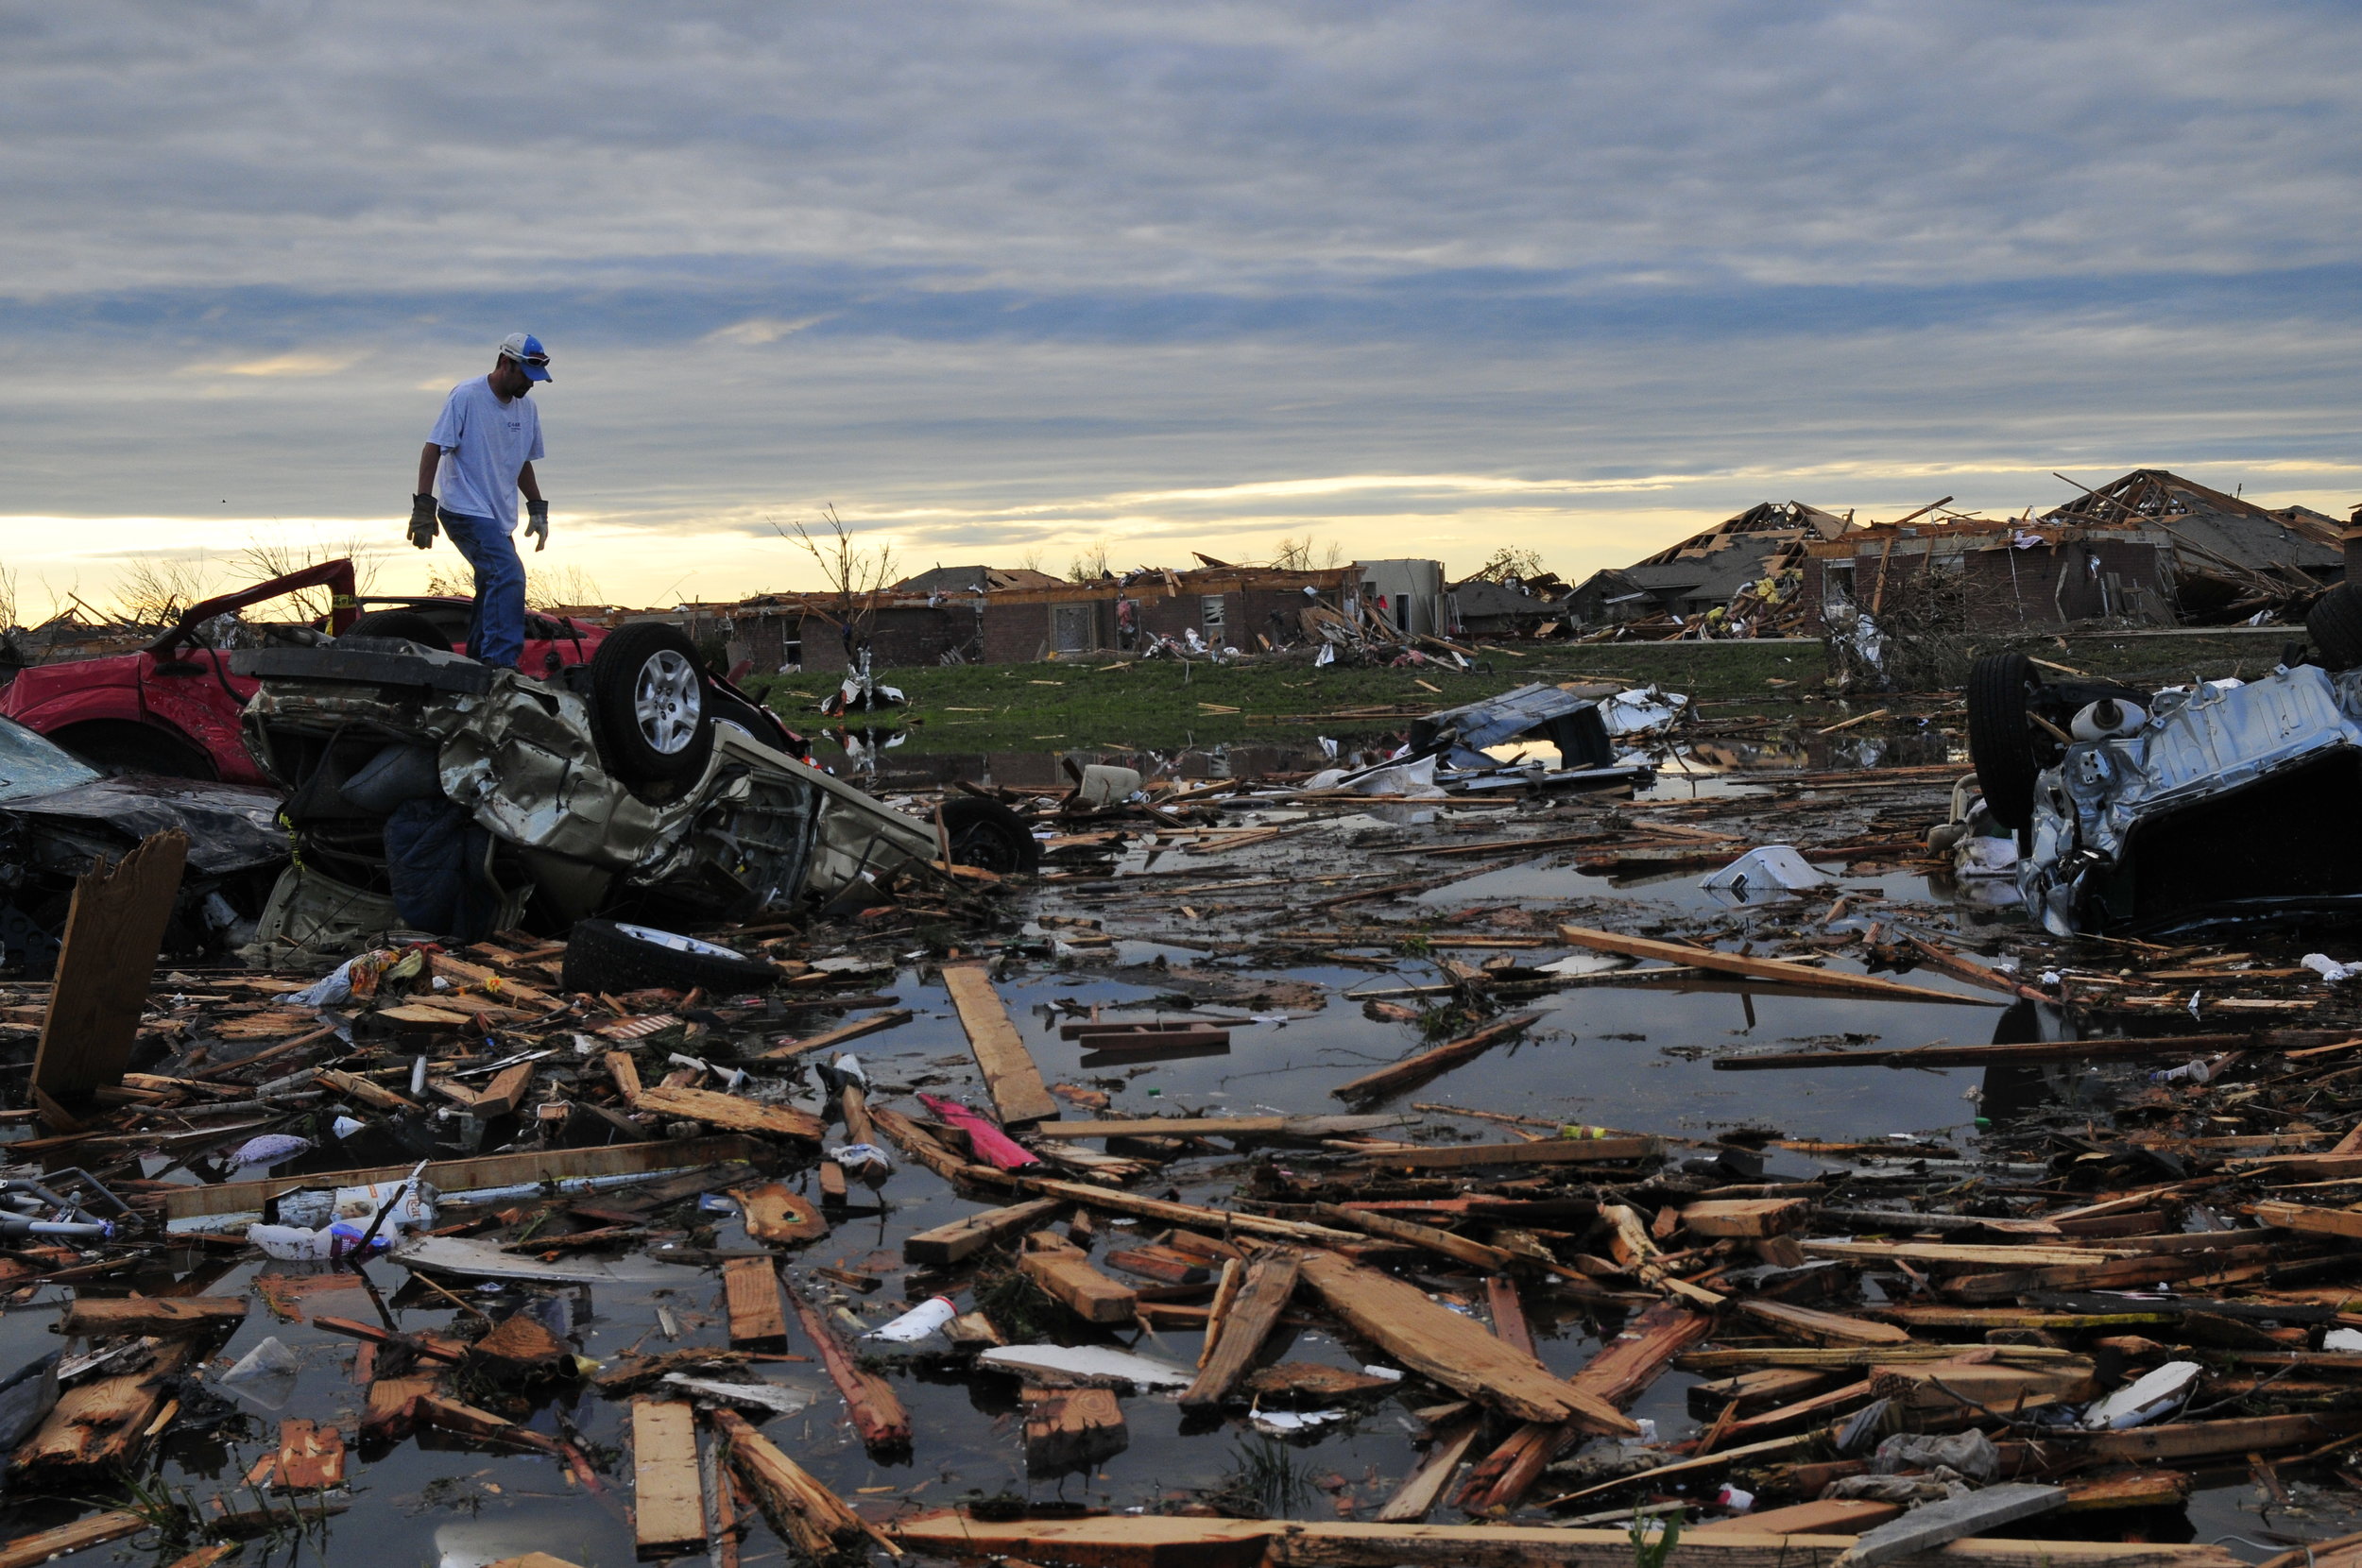  Mark Heflin searches for some belongings in a pond full of debris and cars in a neighborhood that took a direct hit from yesterdays tornado on May, 21 in Moore Oklahoma 